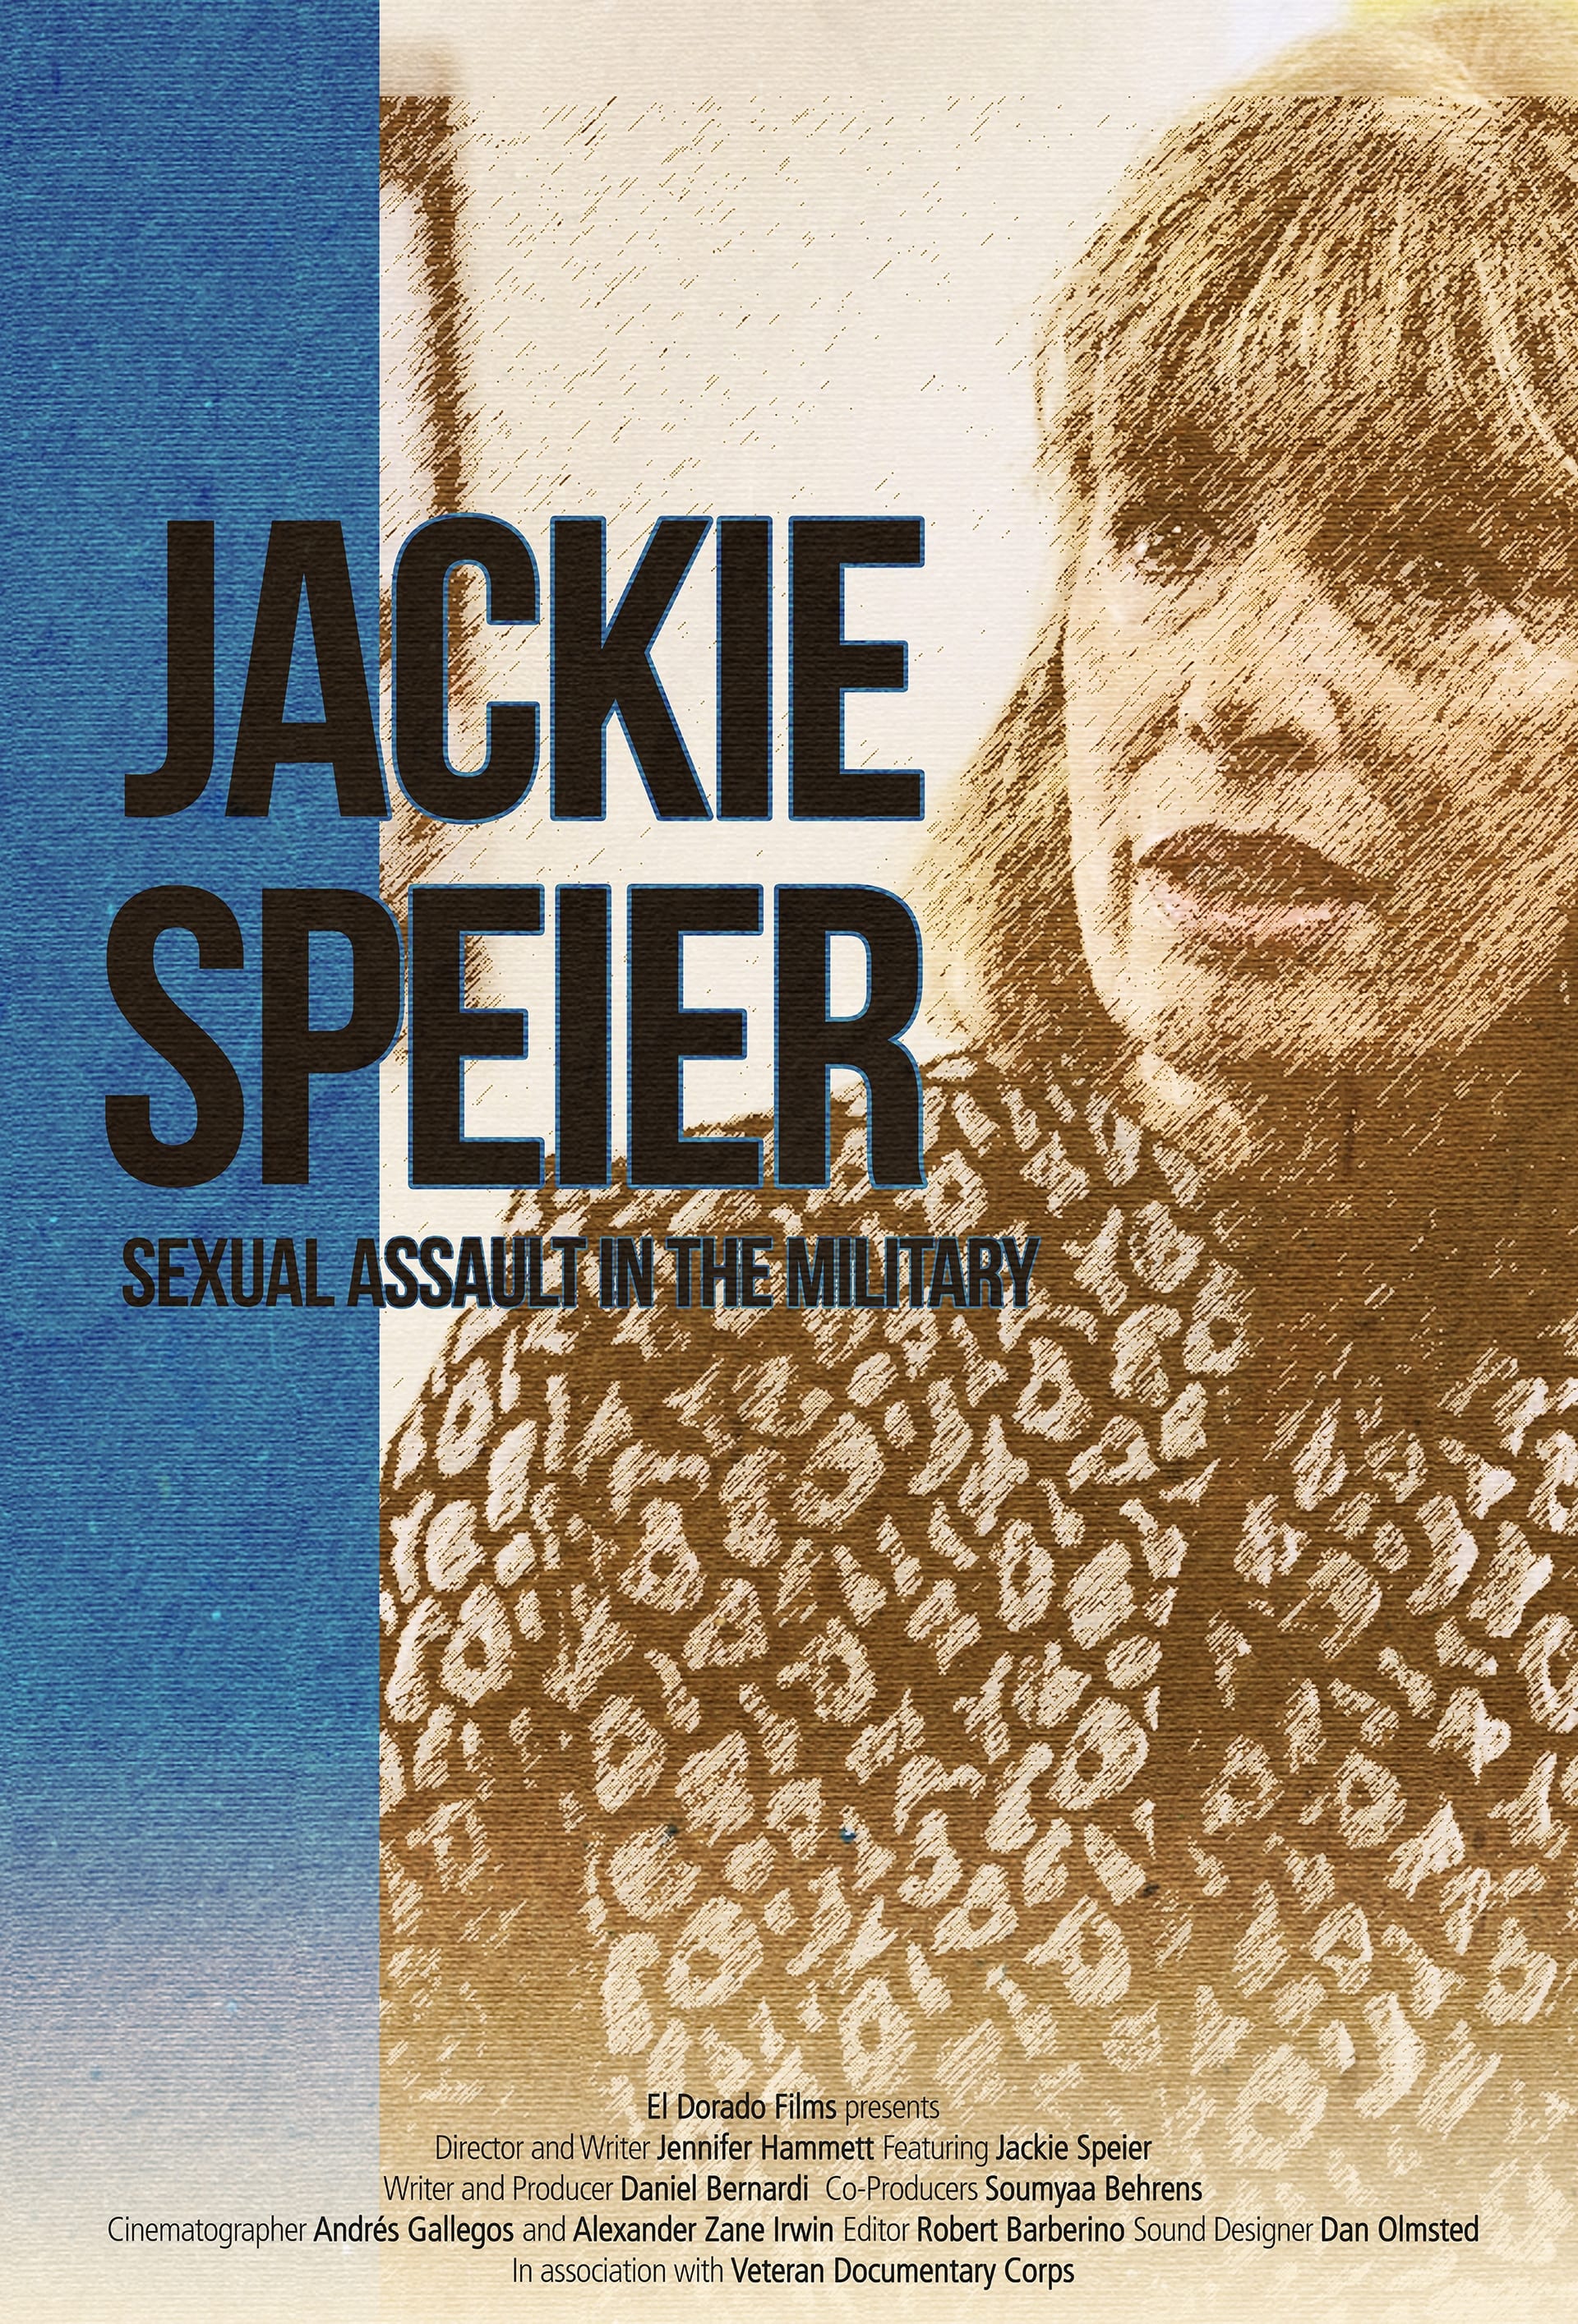 Jackie Speier: Sexual Assault in the Military (2016)